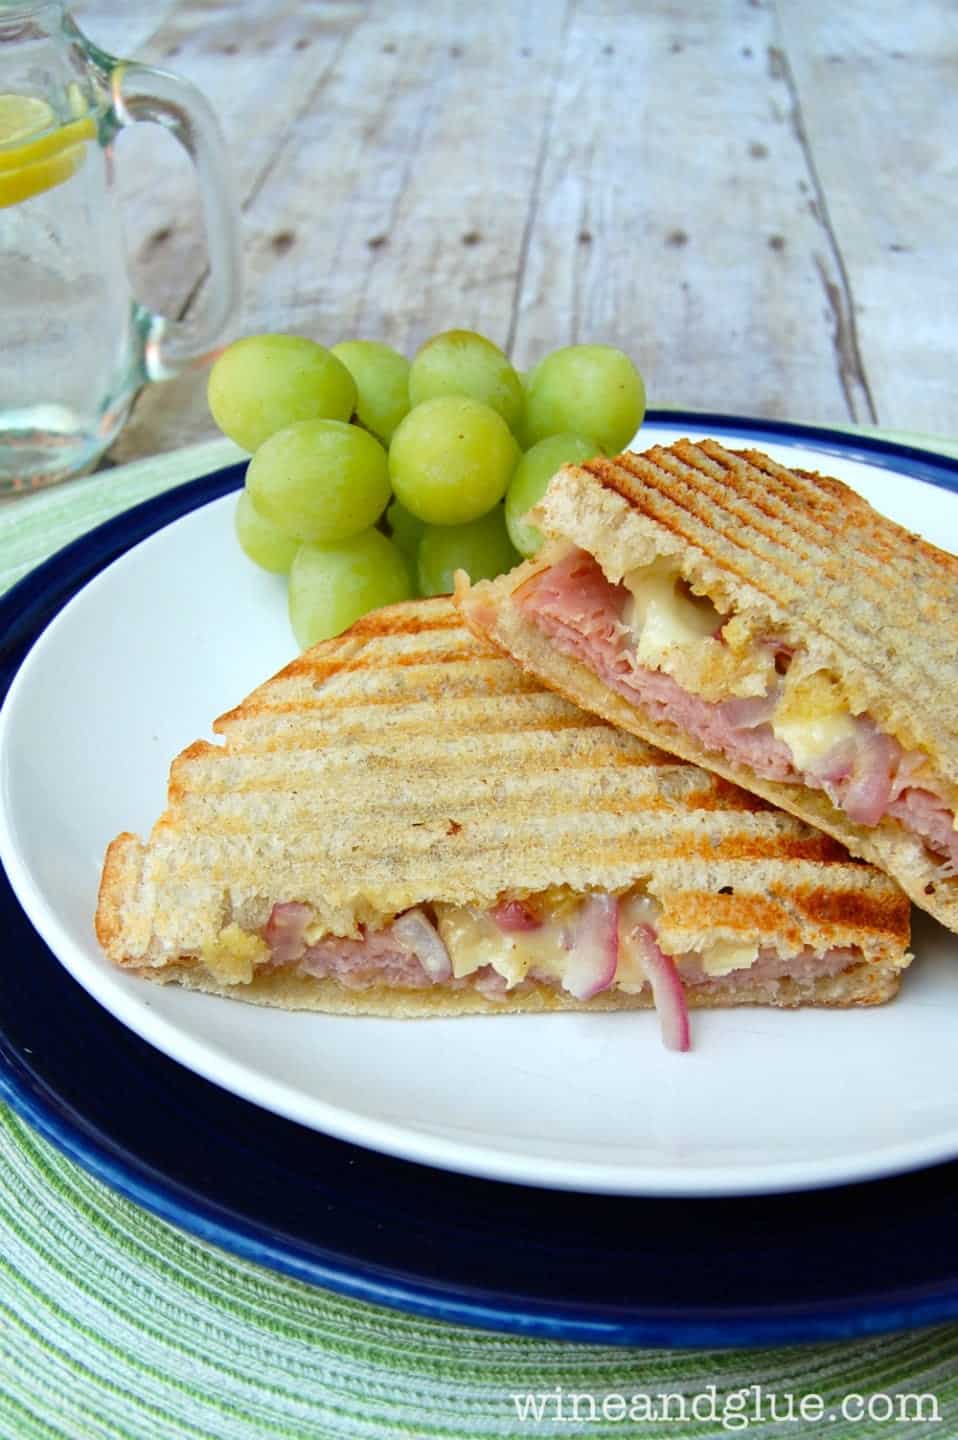 Ham and Brie Panini mixes the most delicious flavors into an easy panini that will make you feel like you are having lunch in a fancy cafe via www.wineandglue.com